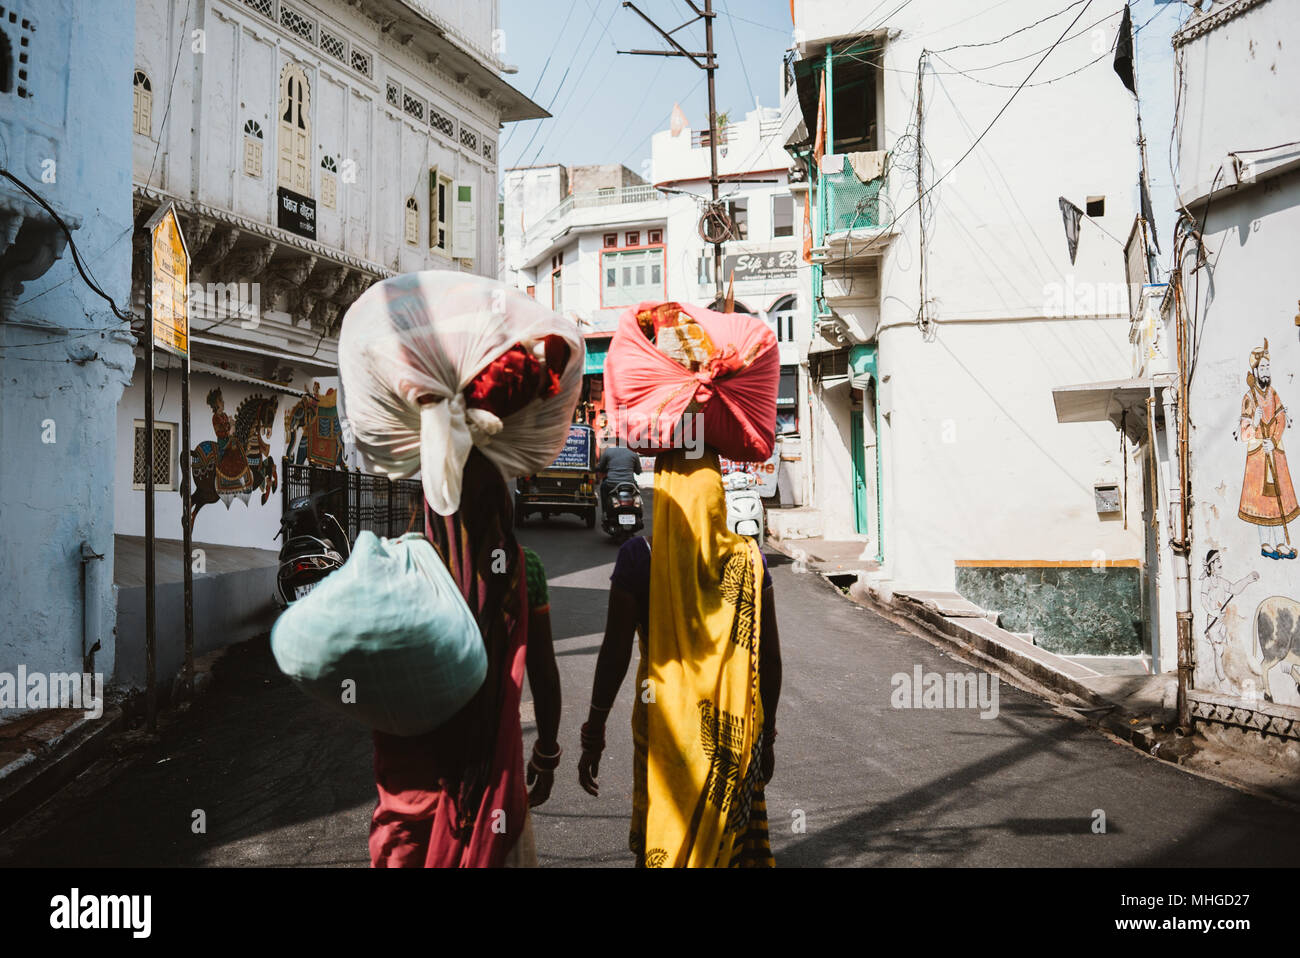 Indian women carrying flowers and fruit on their heads in Udaipur, India Stock Photo